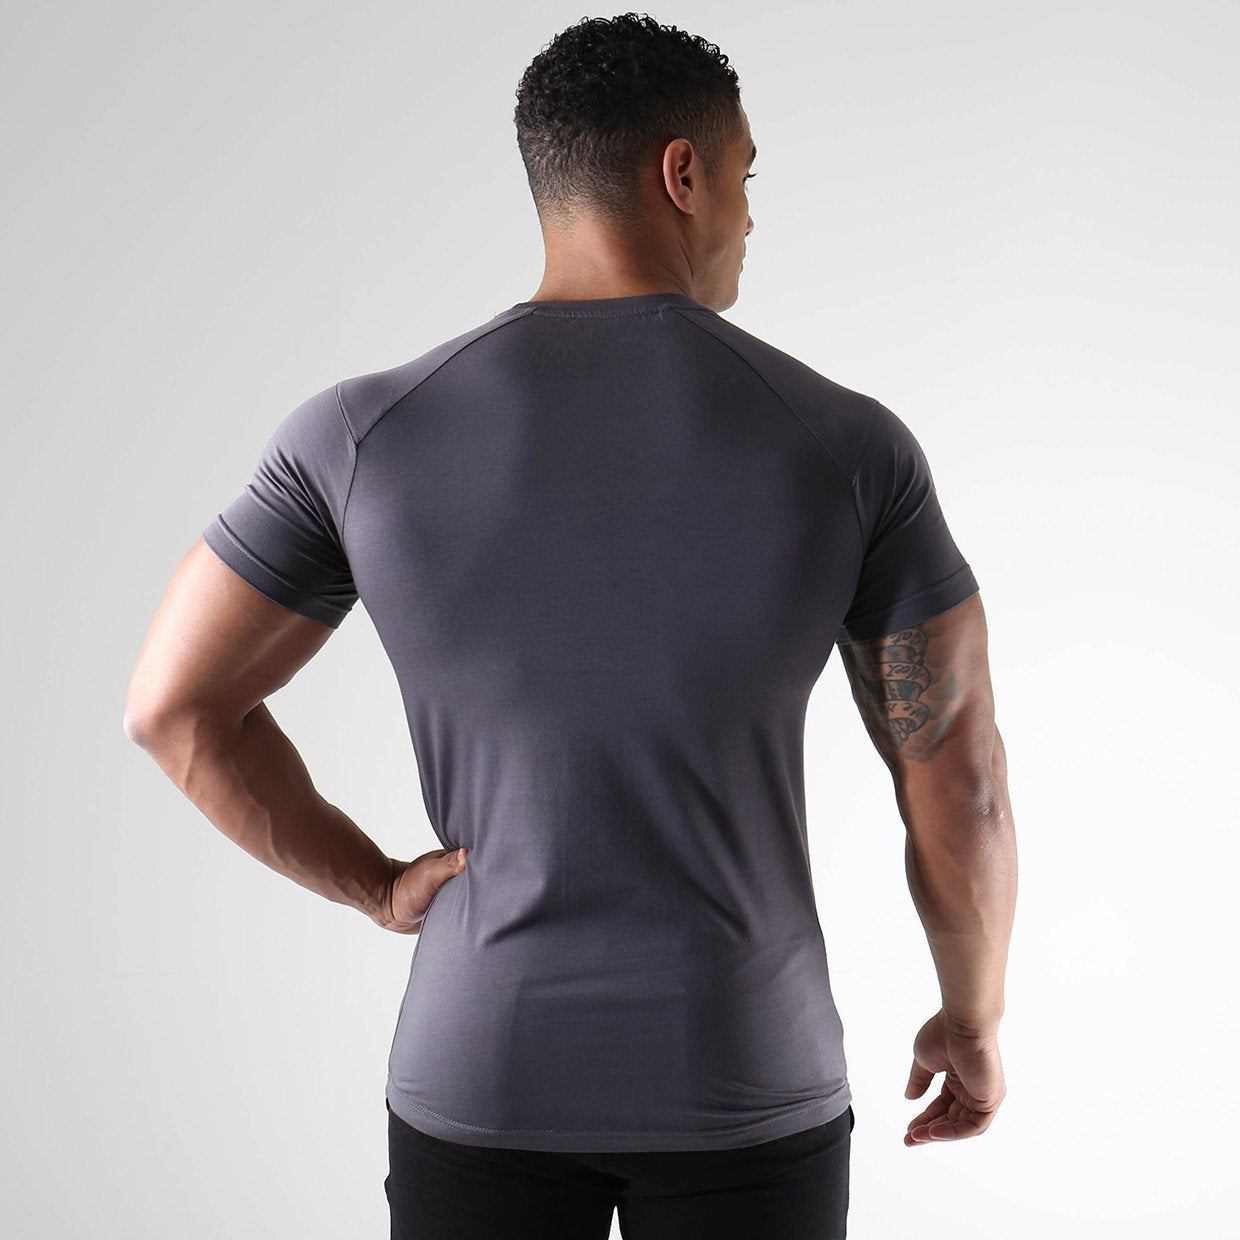 Form T-Shirt V2 in Charcoal - view 4